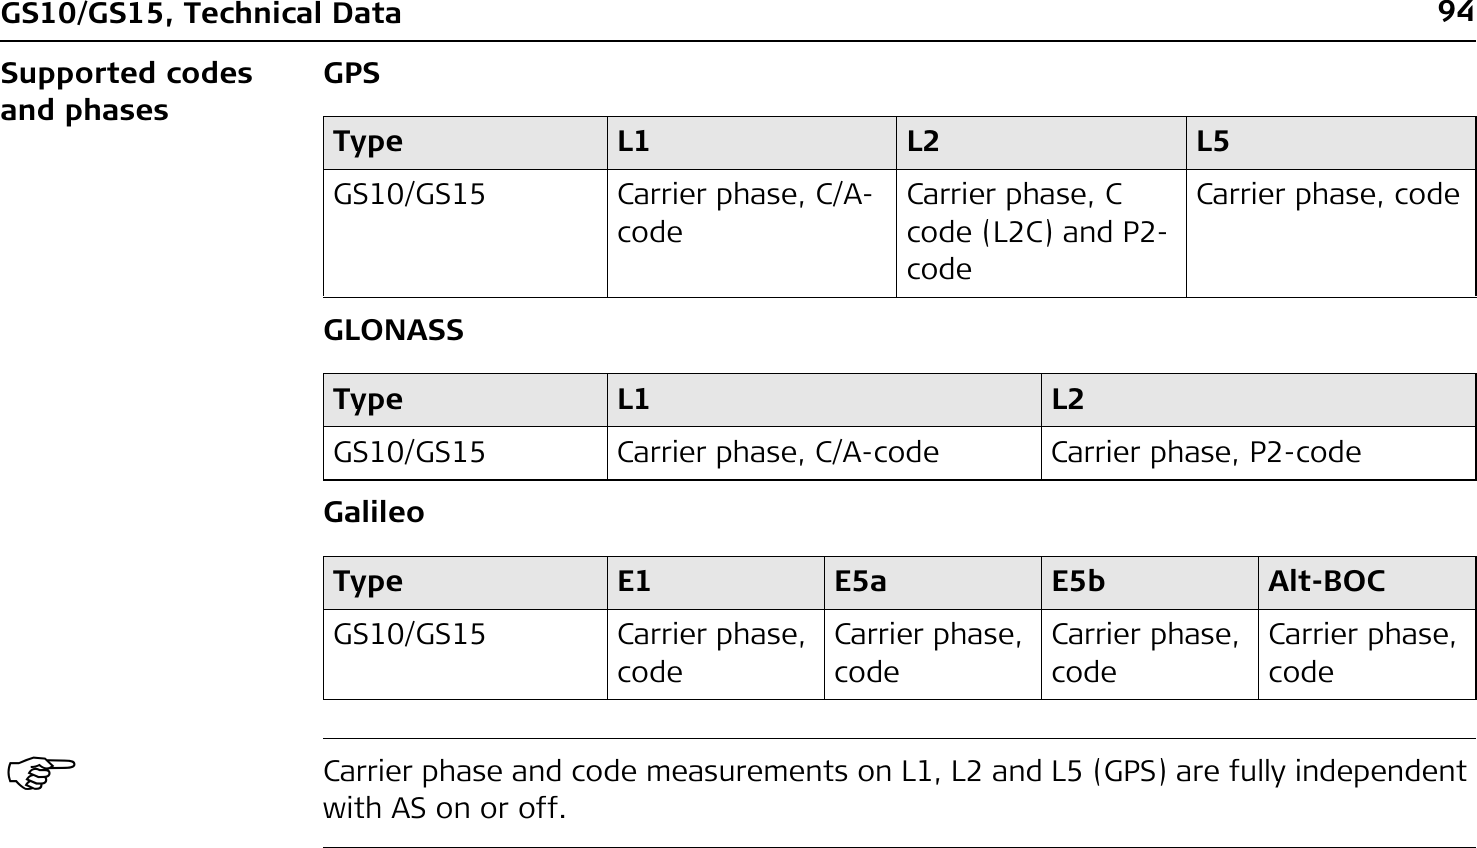 94GS10/GS15, Technical DataSupported codes and phasesGPSGLONASSGalileo)Carrier phase and code measurements on L1, L2 and L5 (GPS) are fully independent with AS on or off.Type L1 L2 L5GS10/GS15 Carrier phase, C/A-codeCarrier phase, C code (L2C) and P2-codeCarrier phase, codeType L1 L2GS10/GS15 Carrier phase, C/A-code Carrier phase, P2-codeType E1 E5a E5b Alt-BOCGS10/GS15 Carrier phase, codeCarrier phase, codeCarrier phase, codeCarrier phase, code